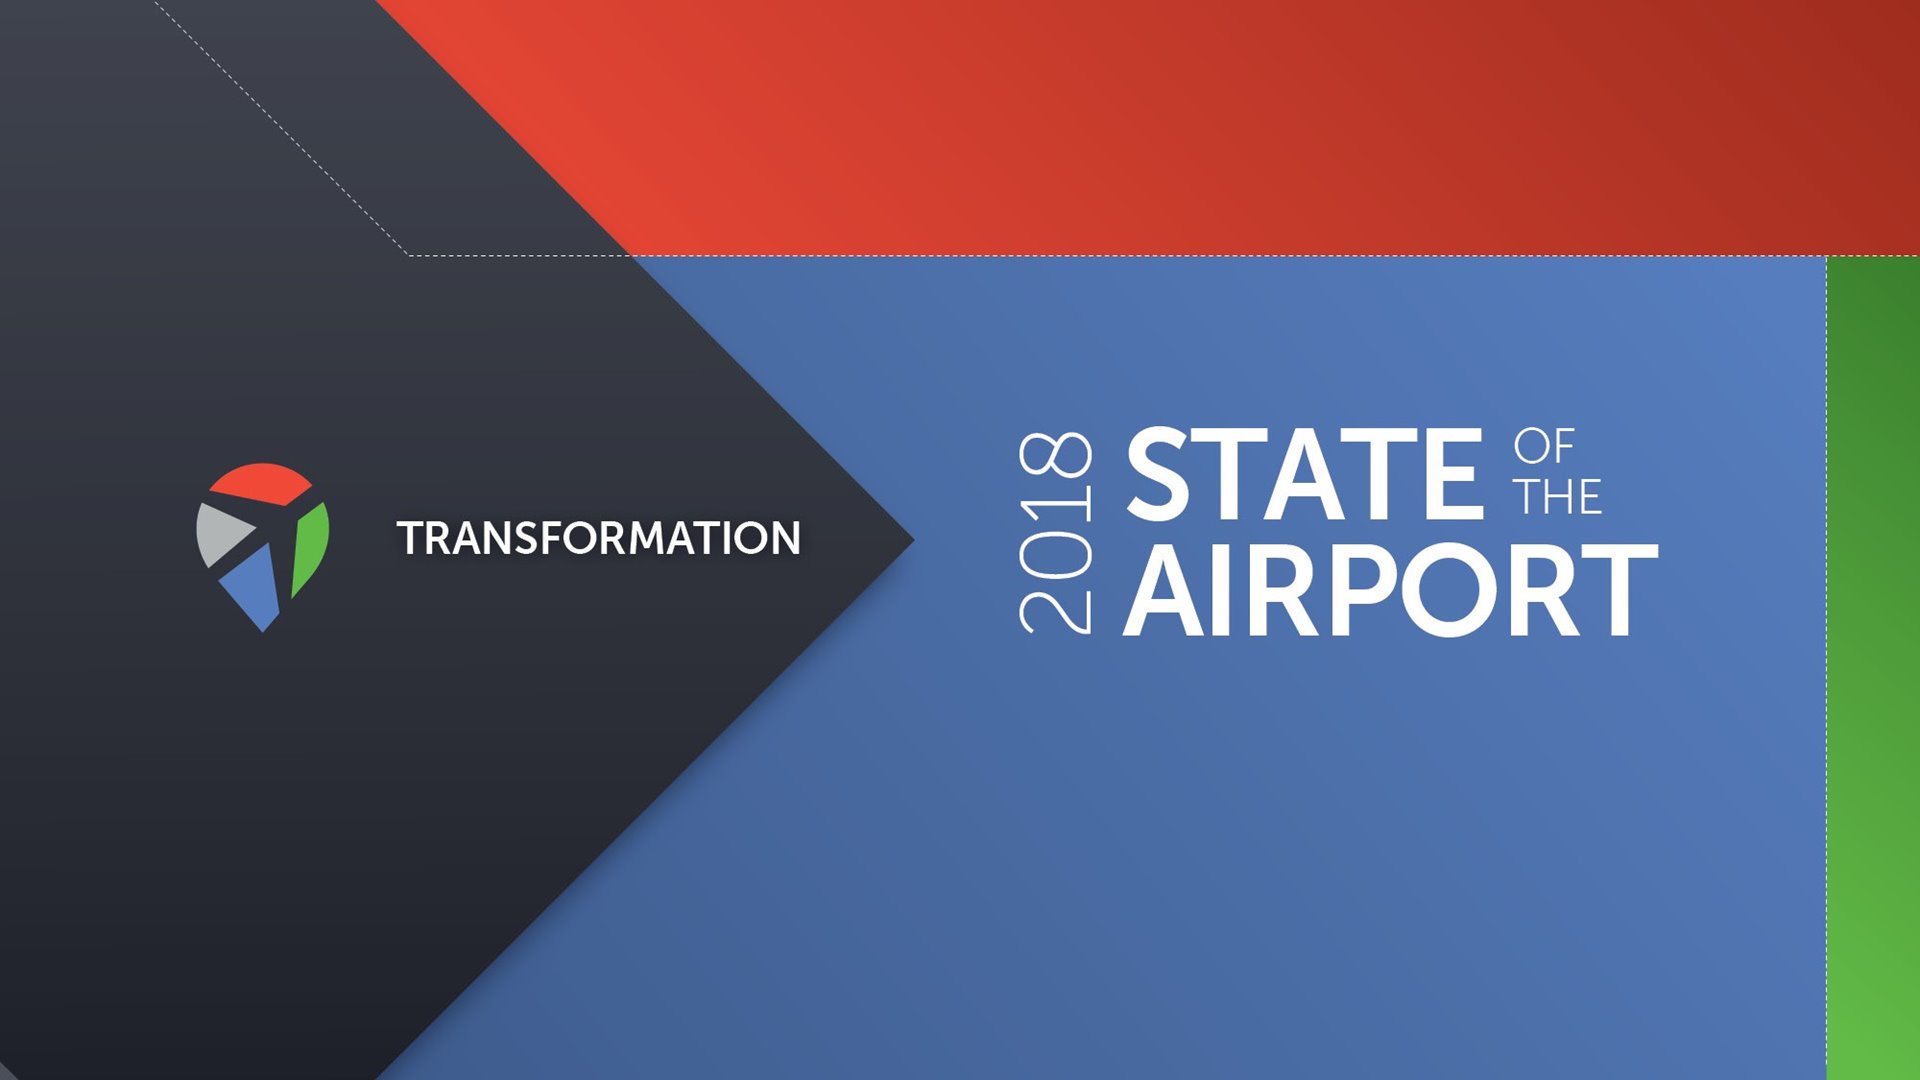 MEDIA ADVISORY: County Executive, Airport CEO and VP of Sales for Alaska Airlines to Discuss ‘State of the Airport’ at Breakfast Event April 4